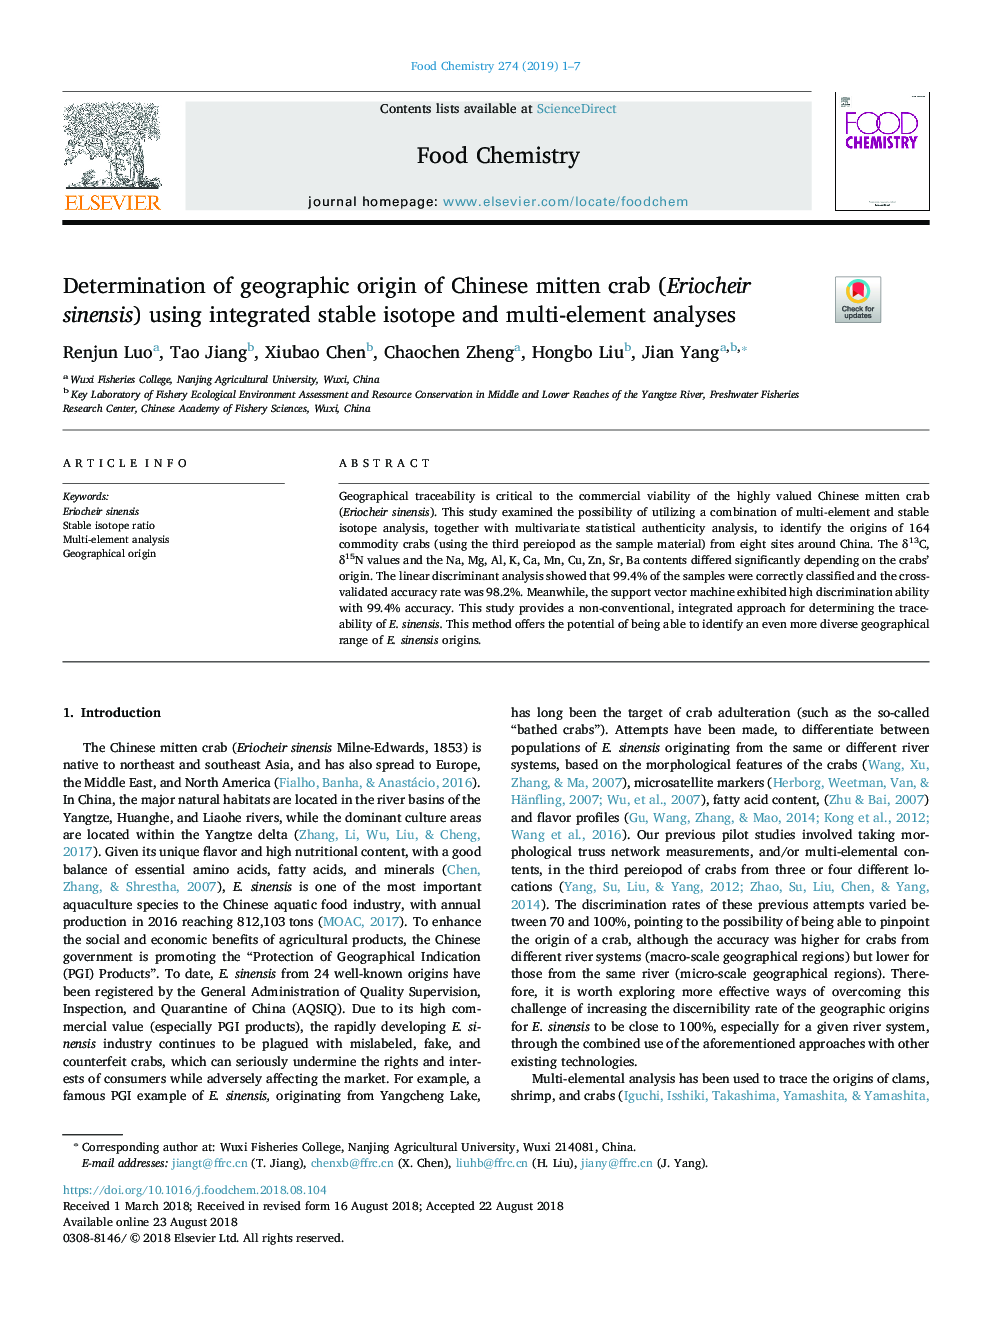 Determination of geographic origin of Chinese mitten crab (Eriocheir sinensis) using integrated stable isotope and multi-element analyses